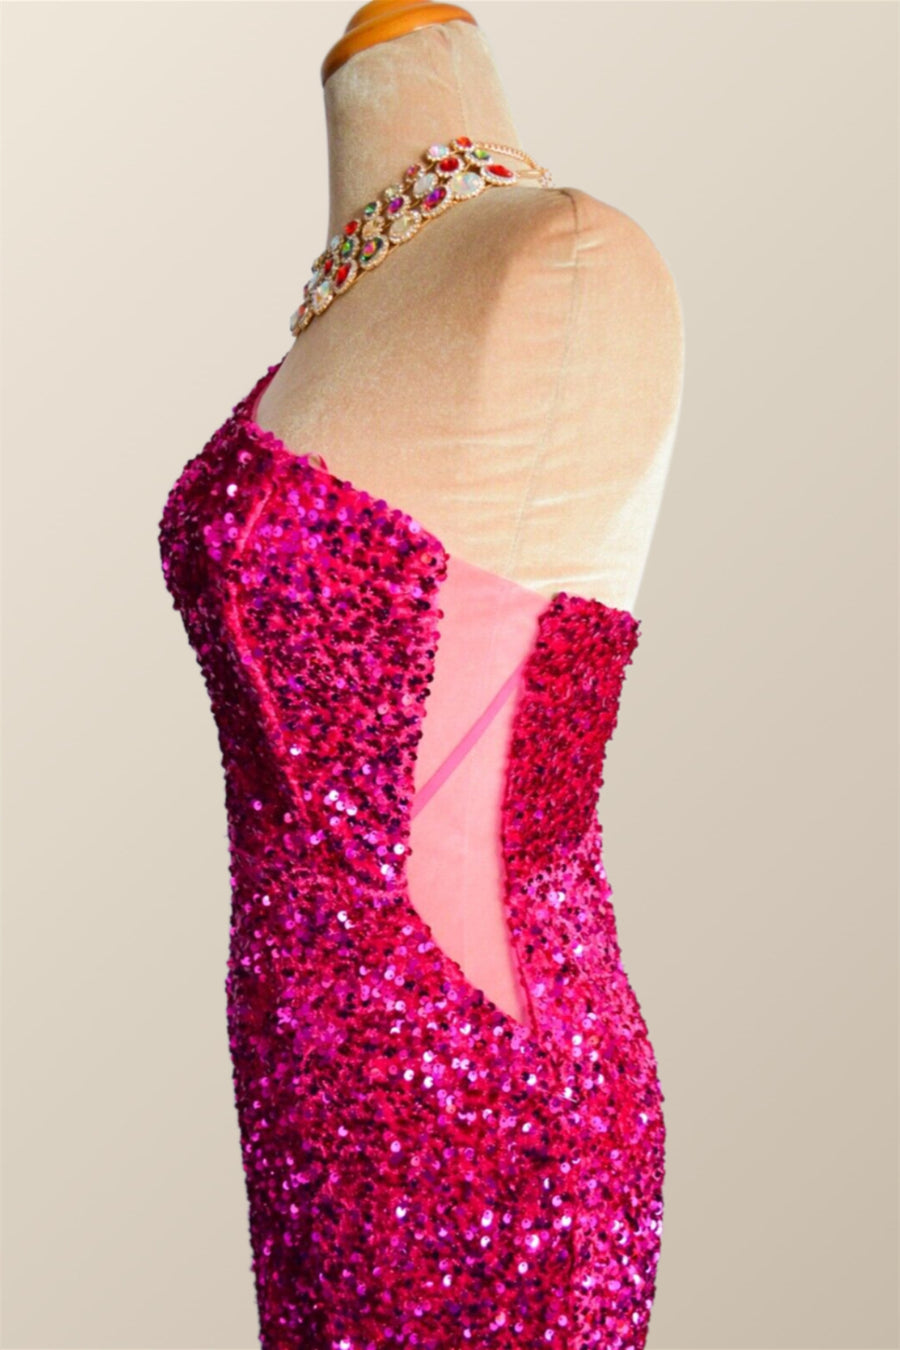 One Shoulder Fuchsia Sequin Mermaid Long Party Dress